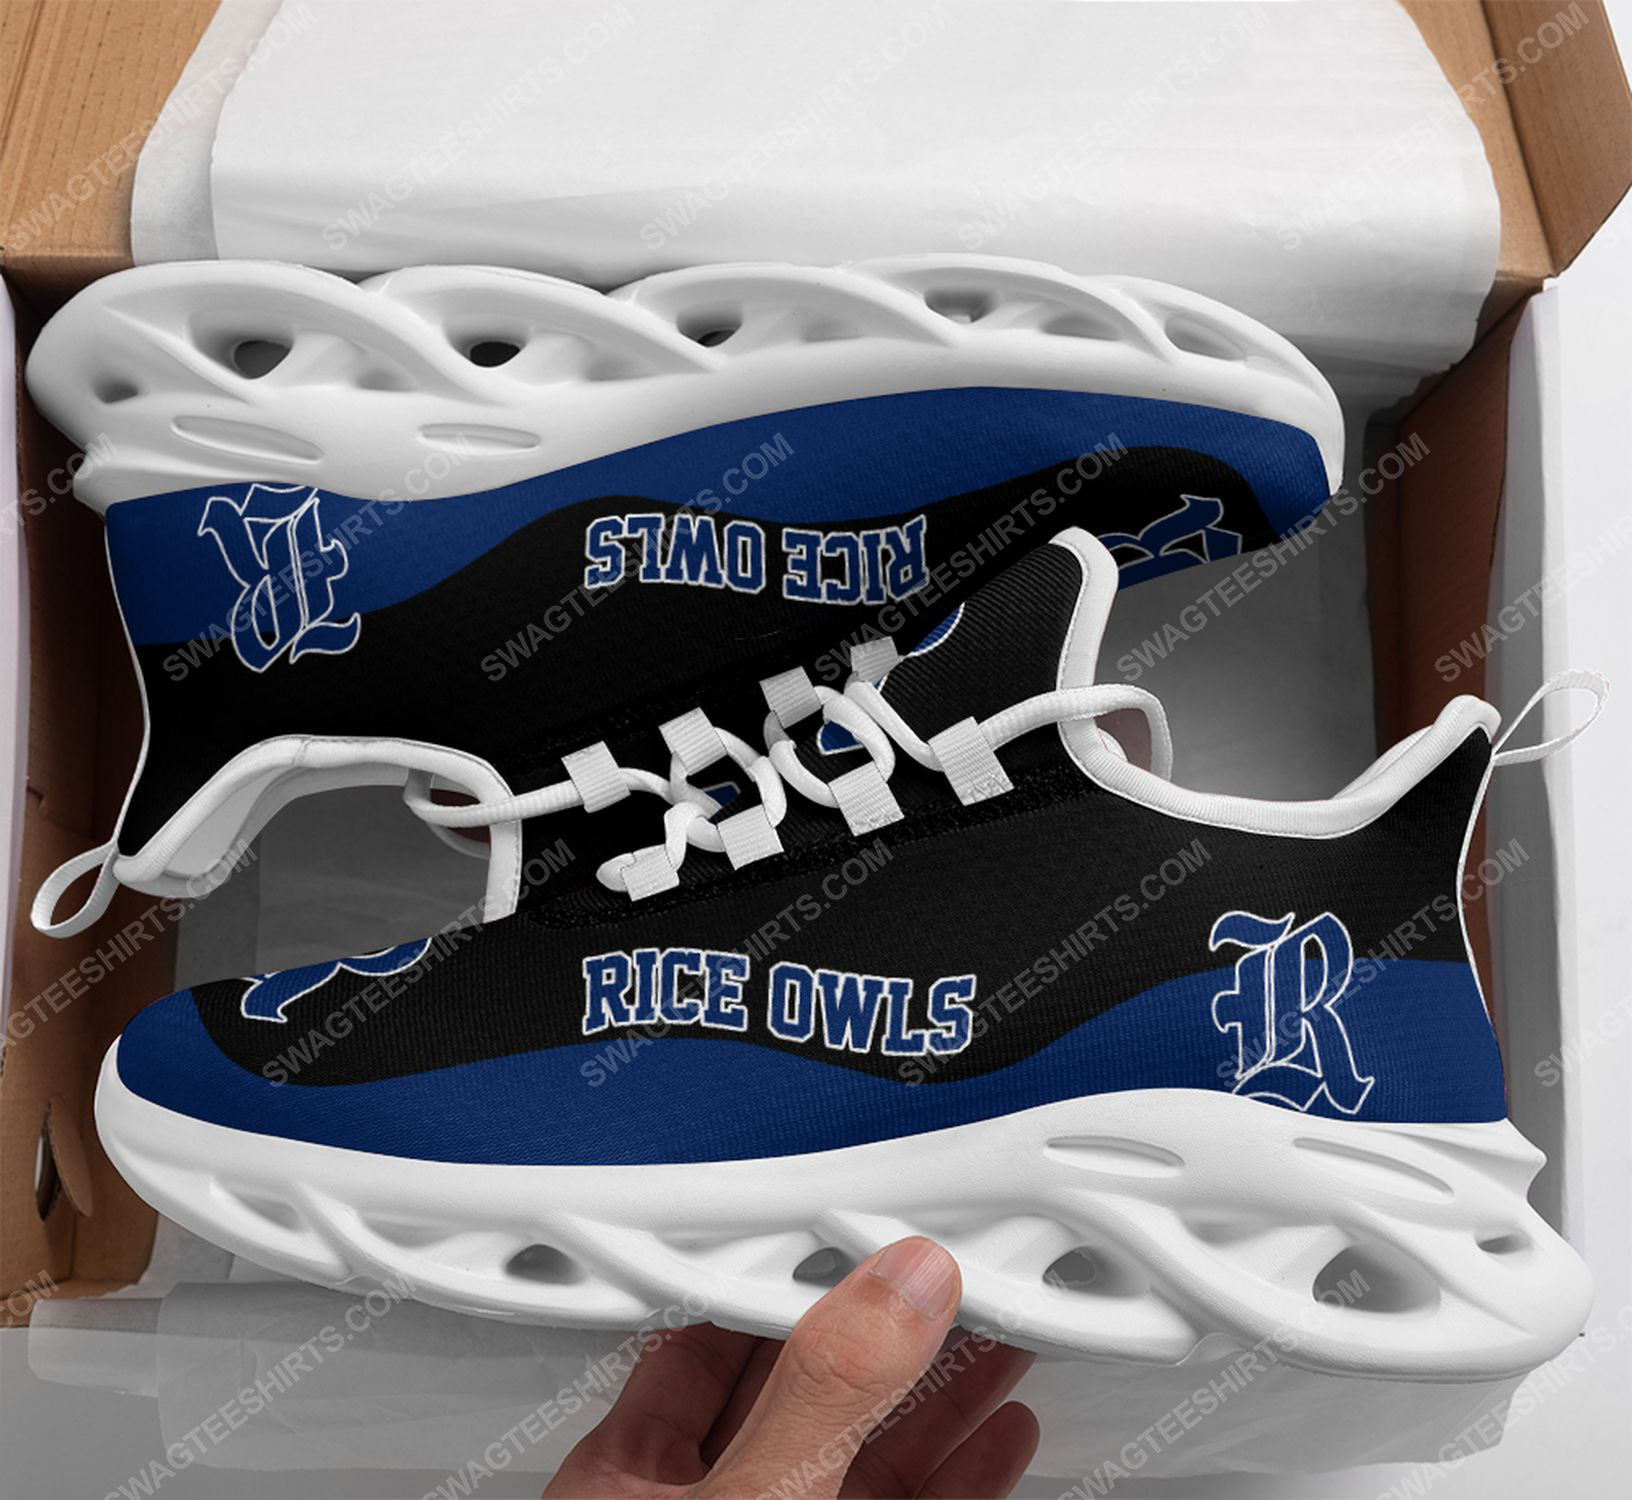 The rice owls football team max soul shoes 1